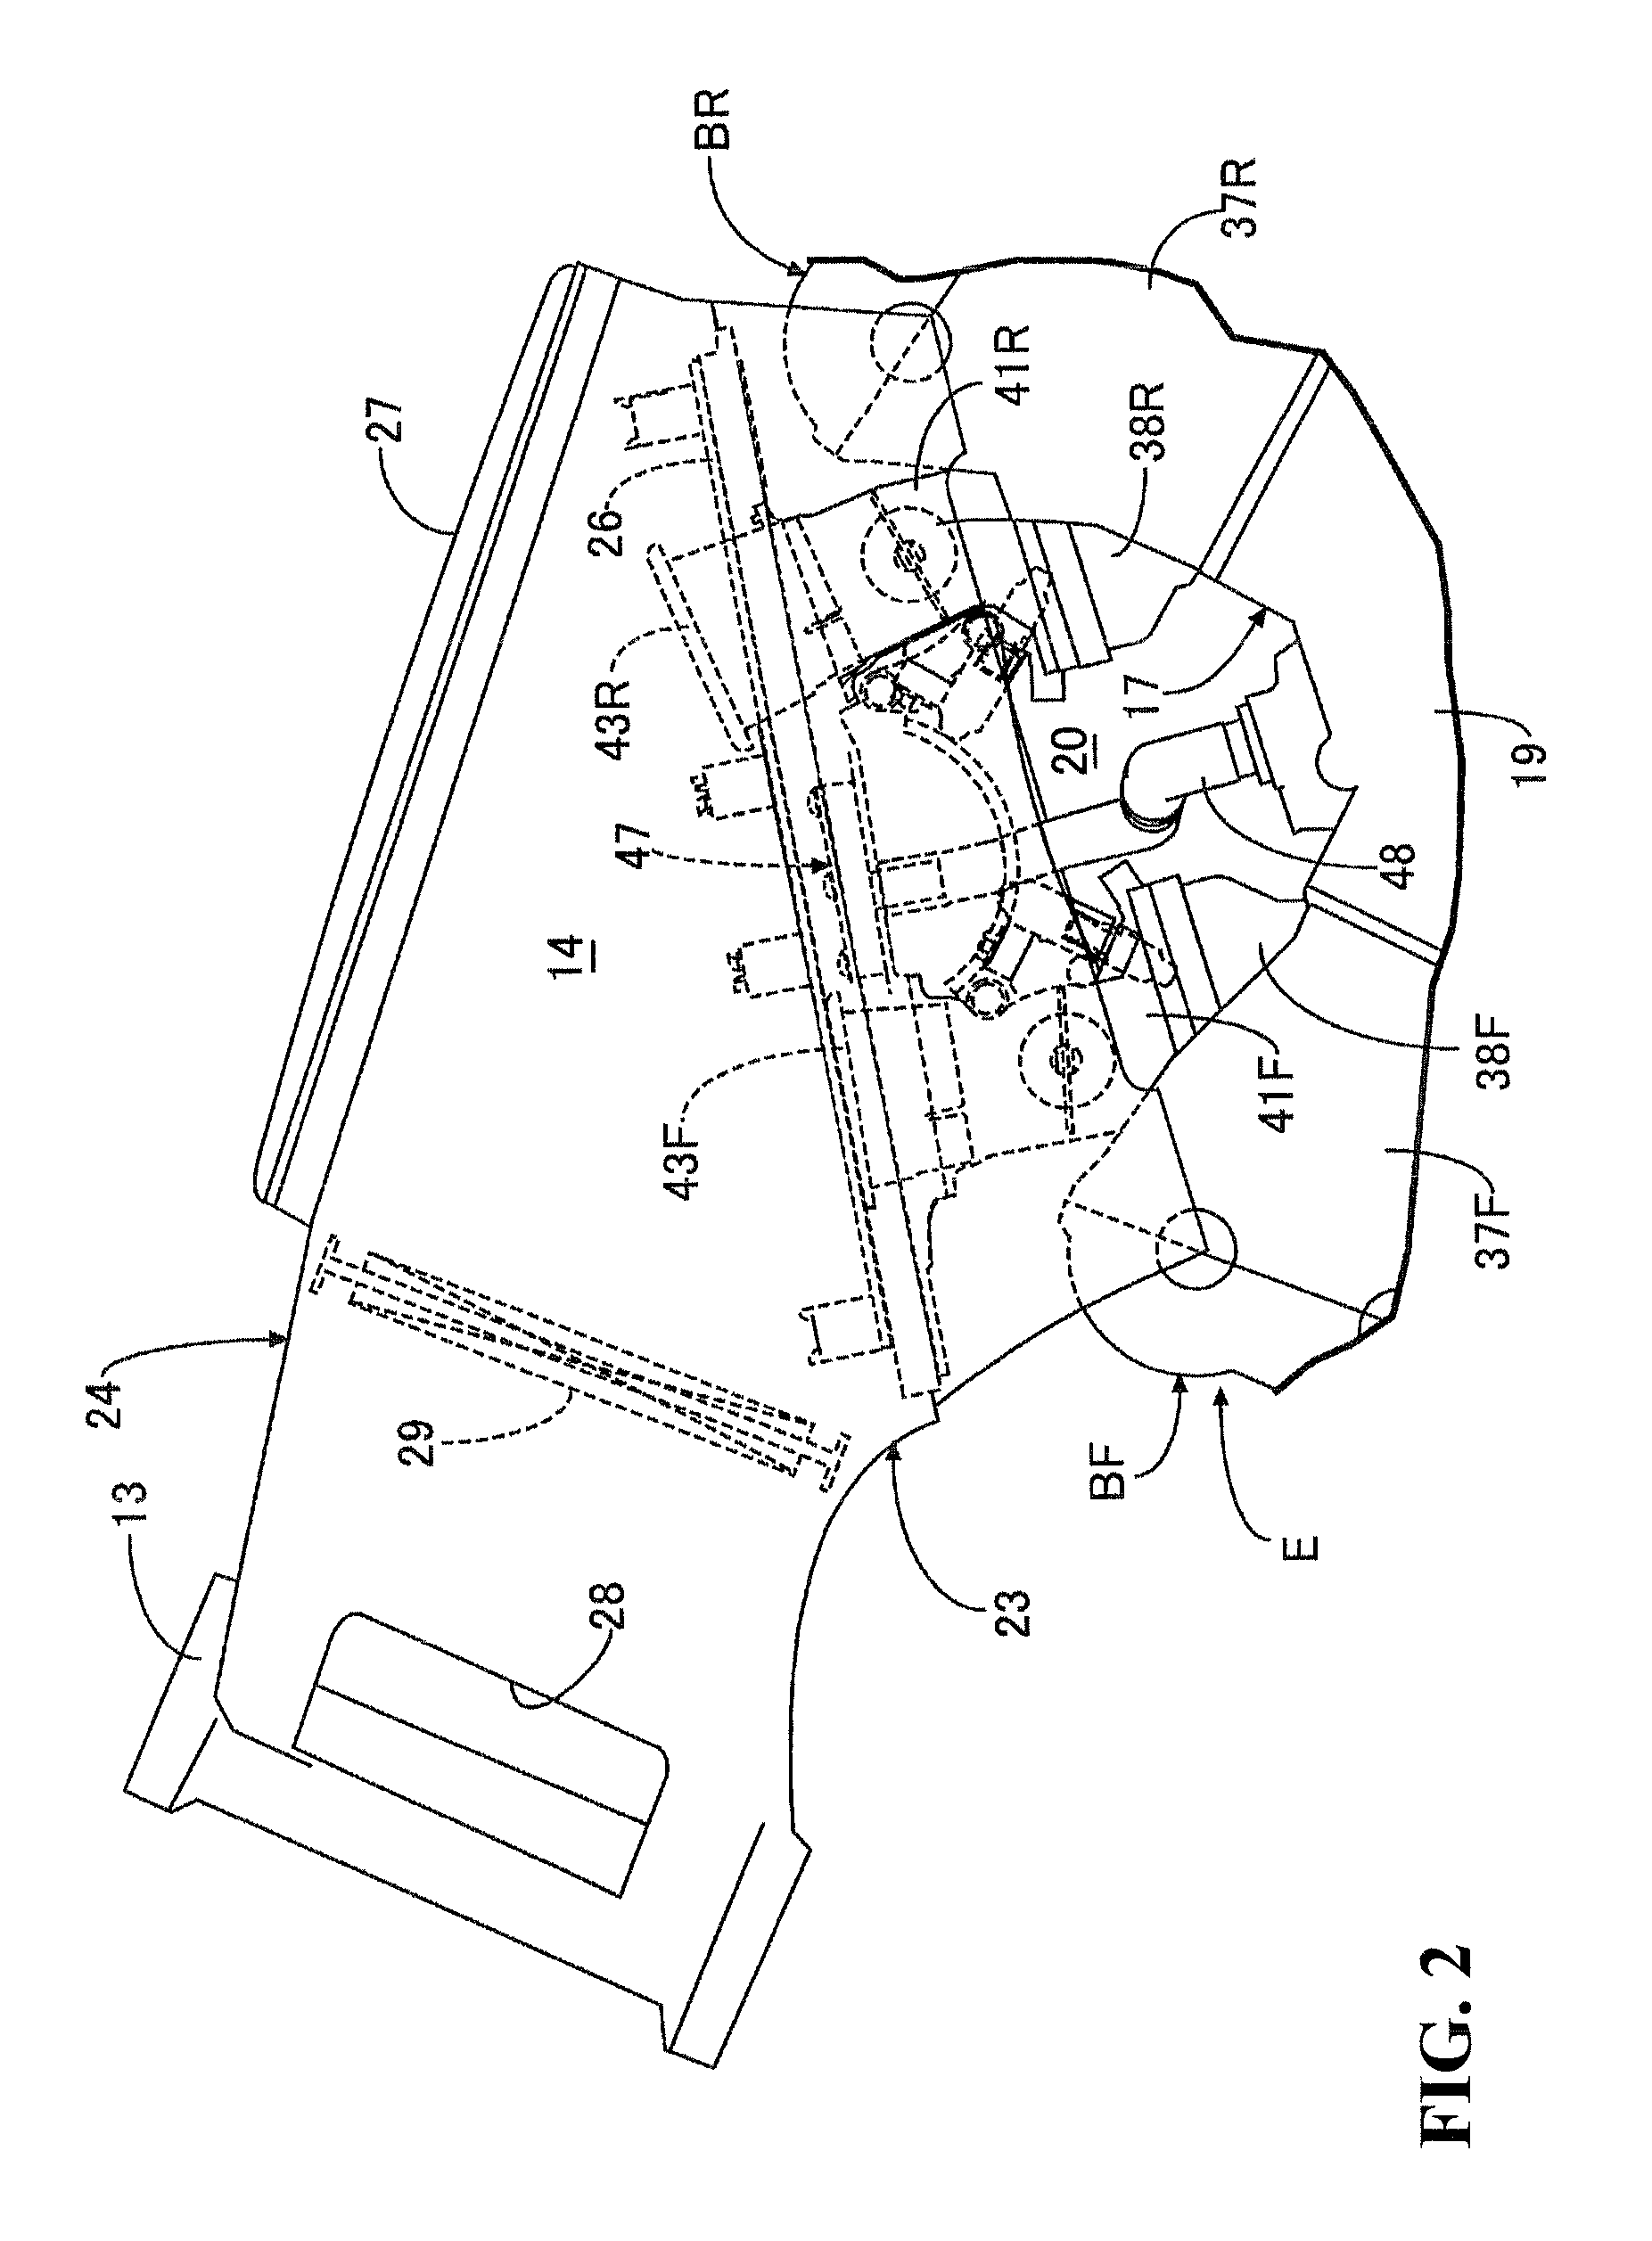 Breather apparatus for internal combustion engine for vehicle